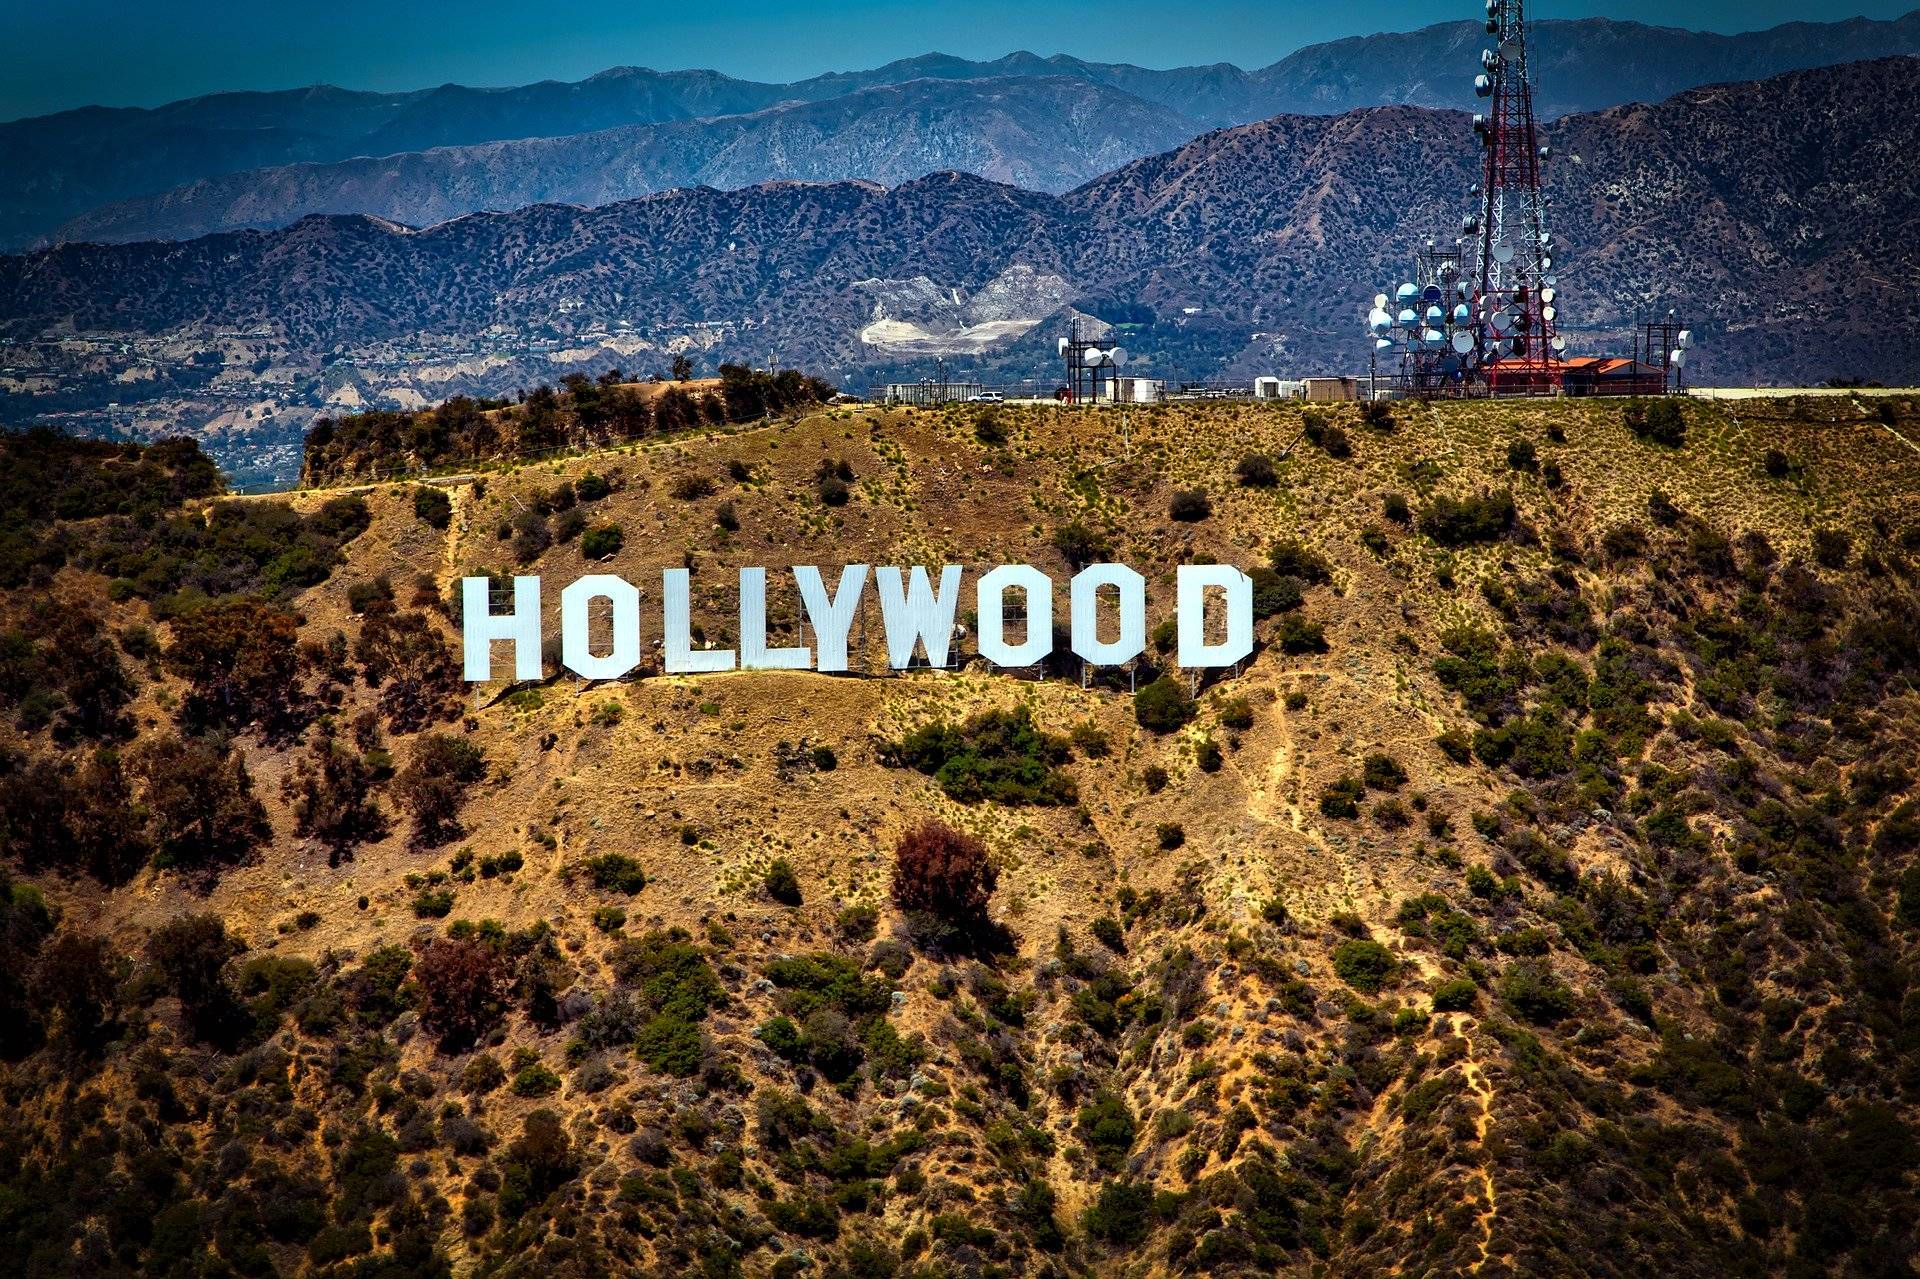 All About the UTA Job List - The Hollywood Industry Job Document